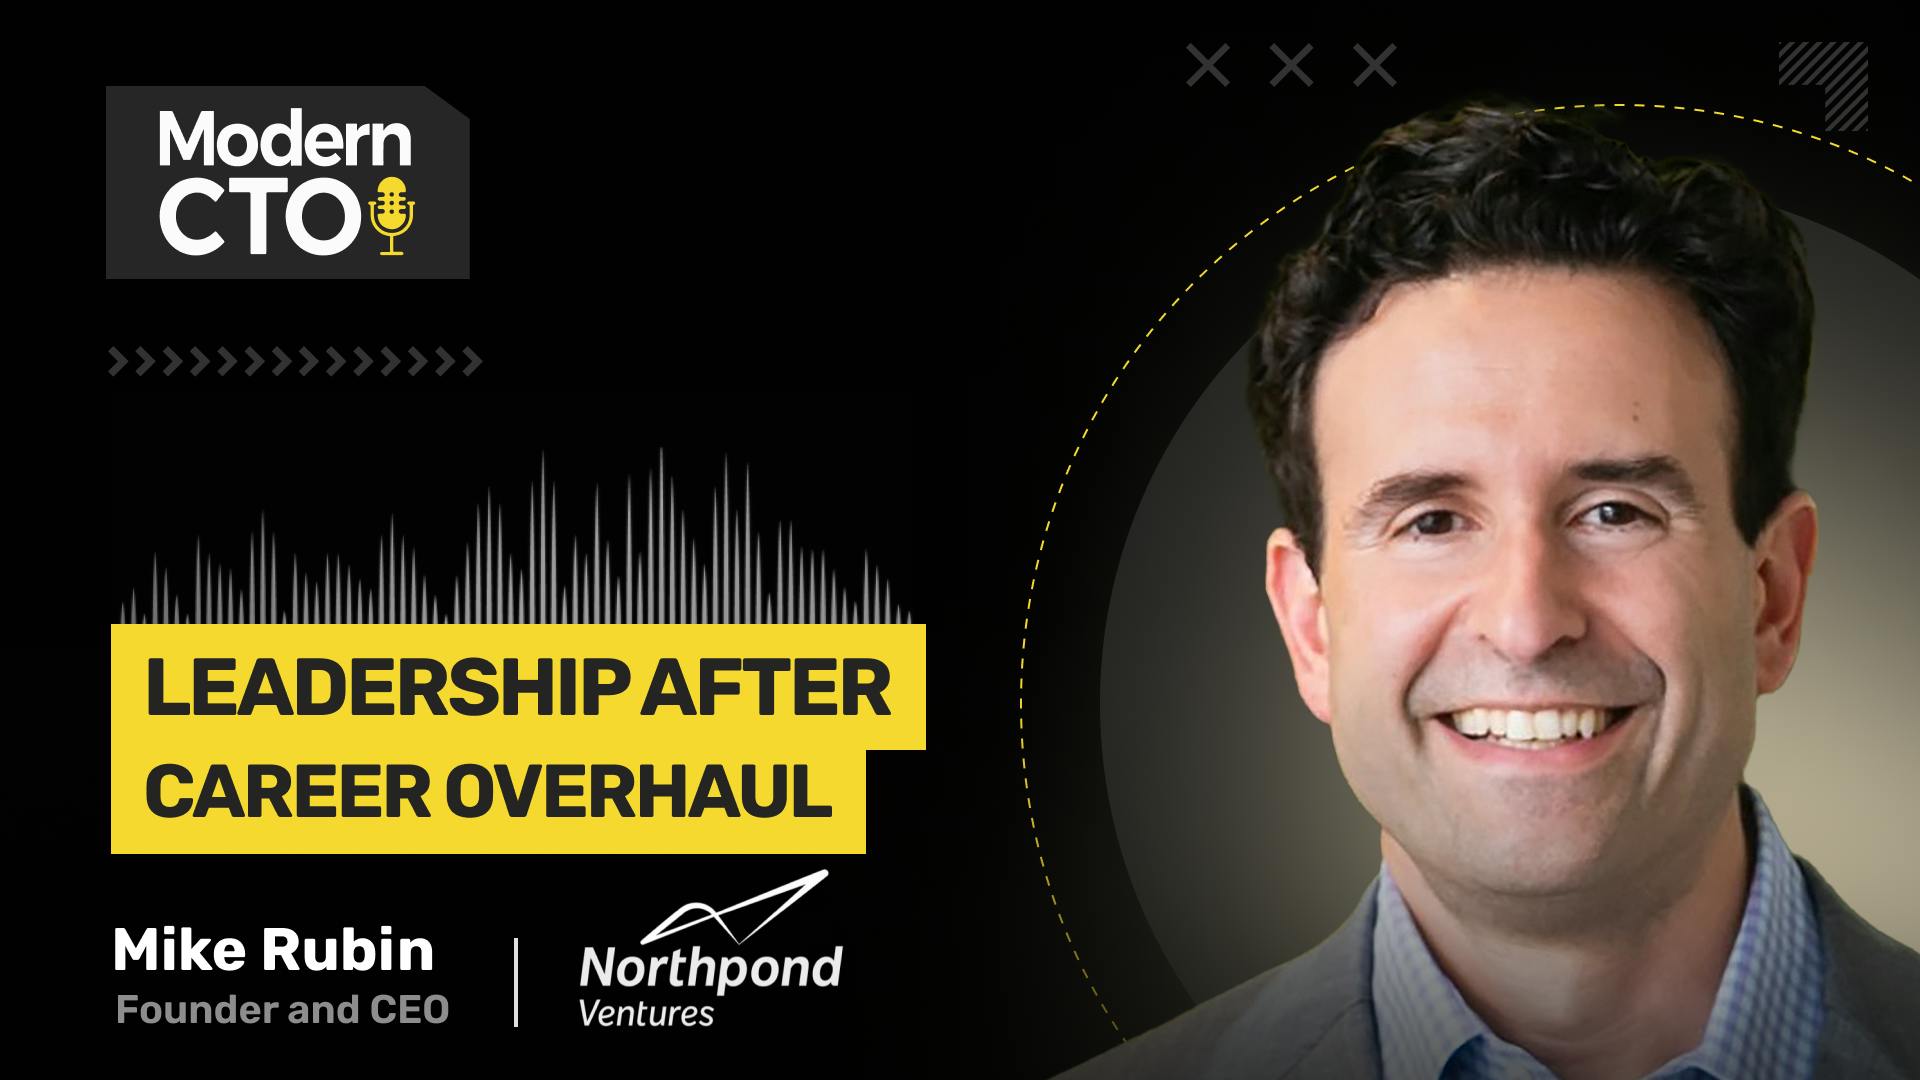 Leadership After Career Overhaul with Mike Rubin, Founder and CEO at Northpond Ventures